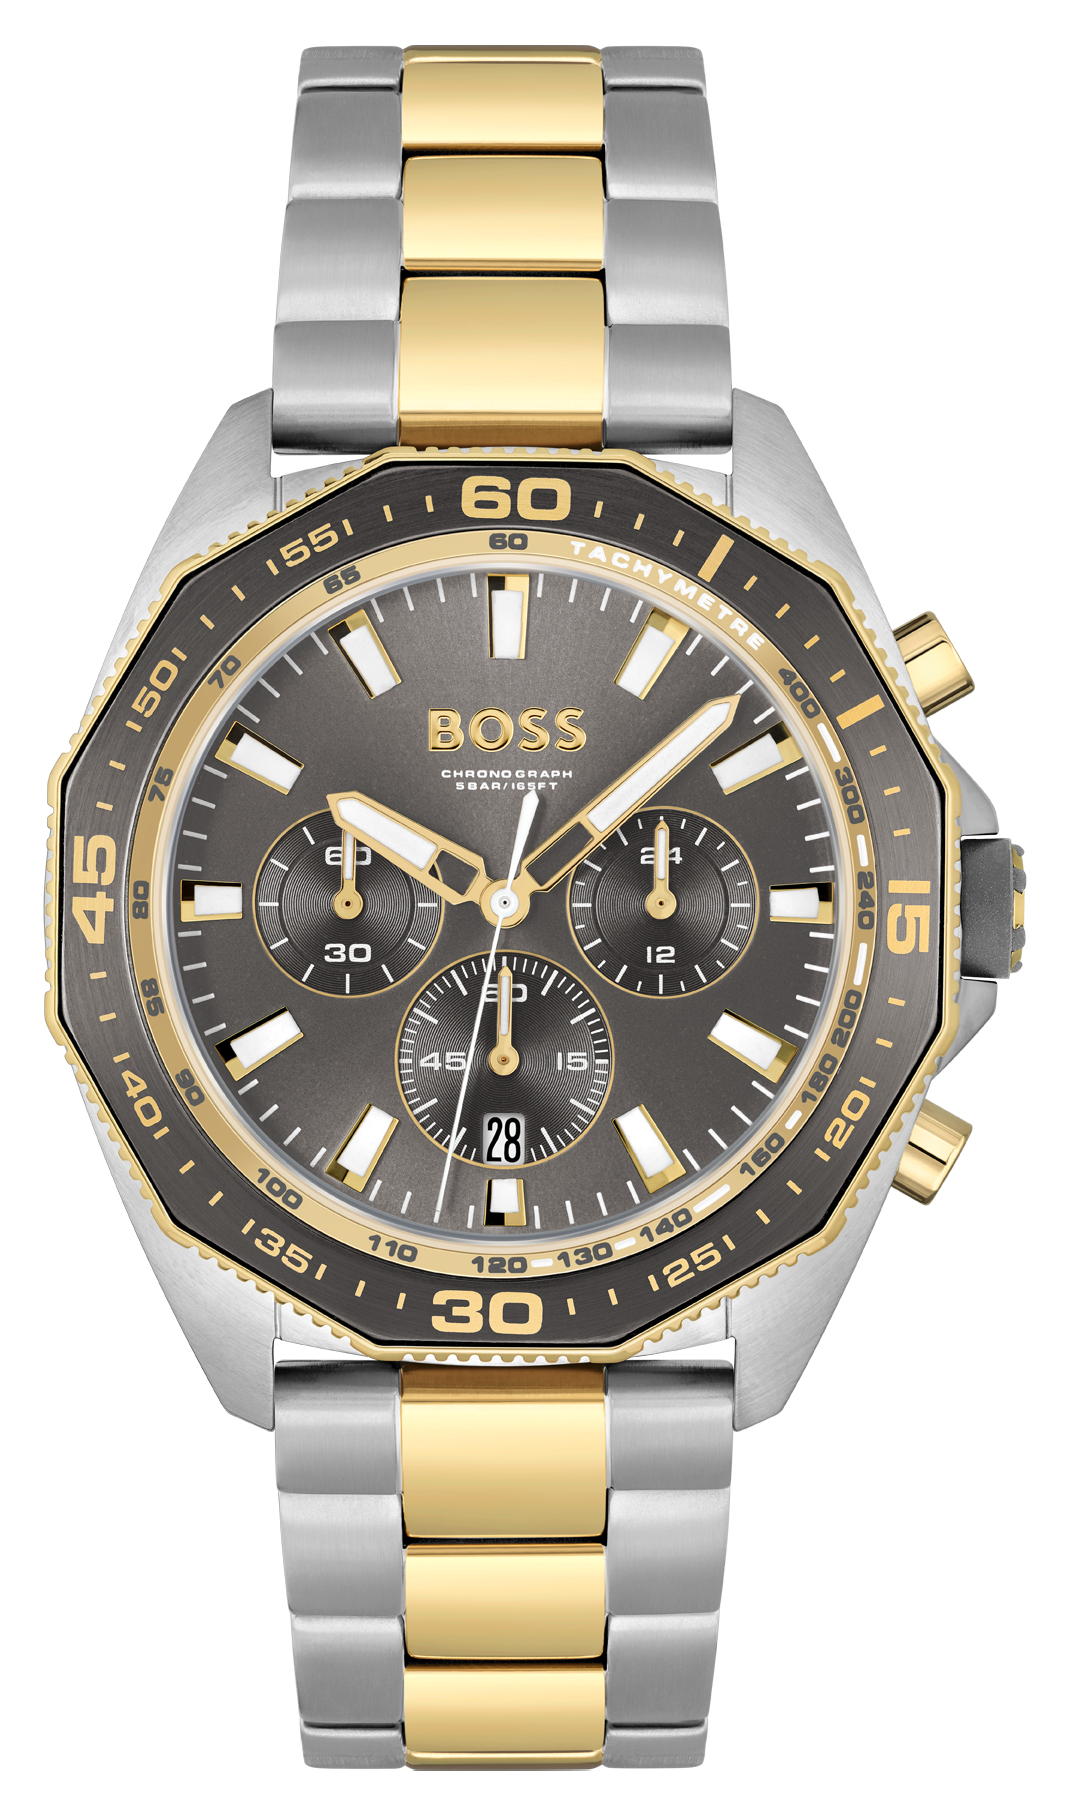 Top 10 Christmas Gift Ideas for Dad - First Class Watches Blog